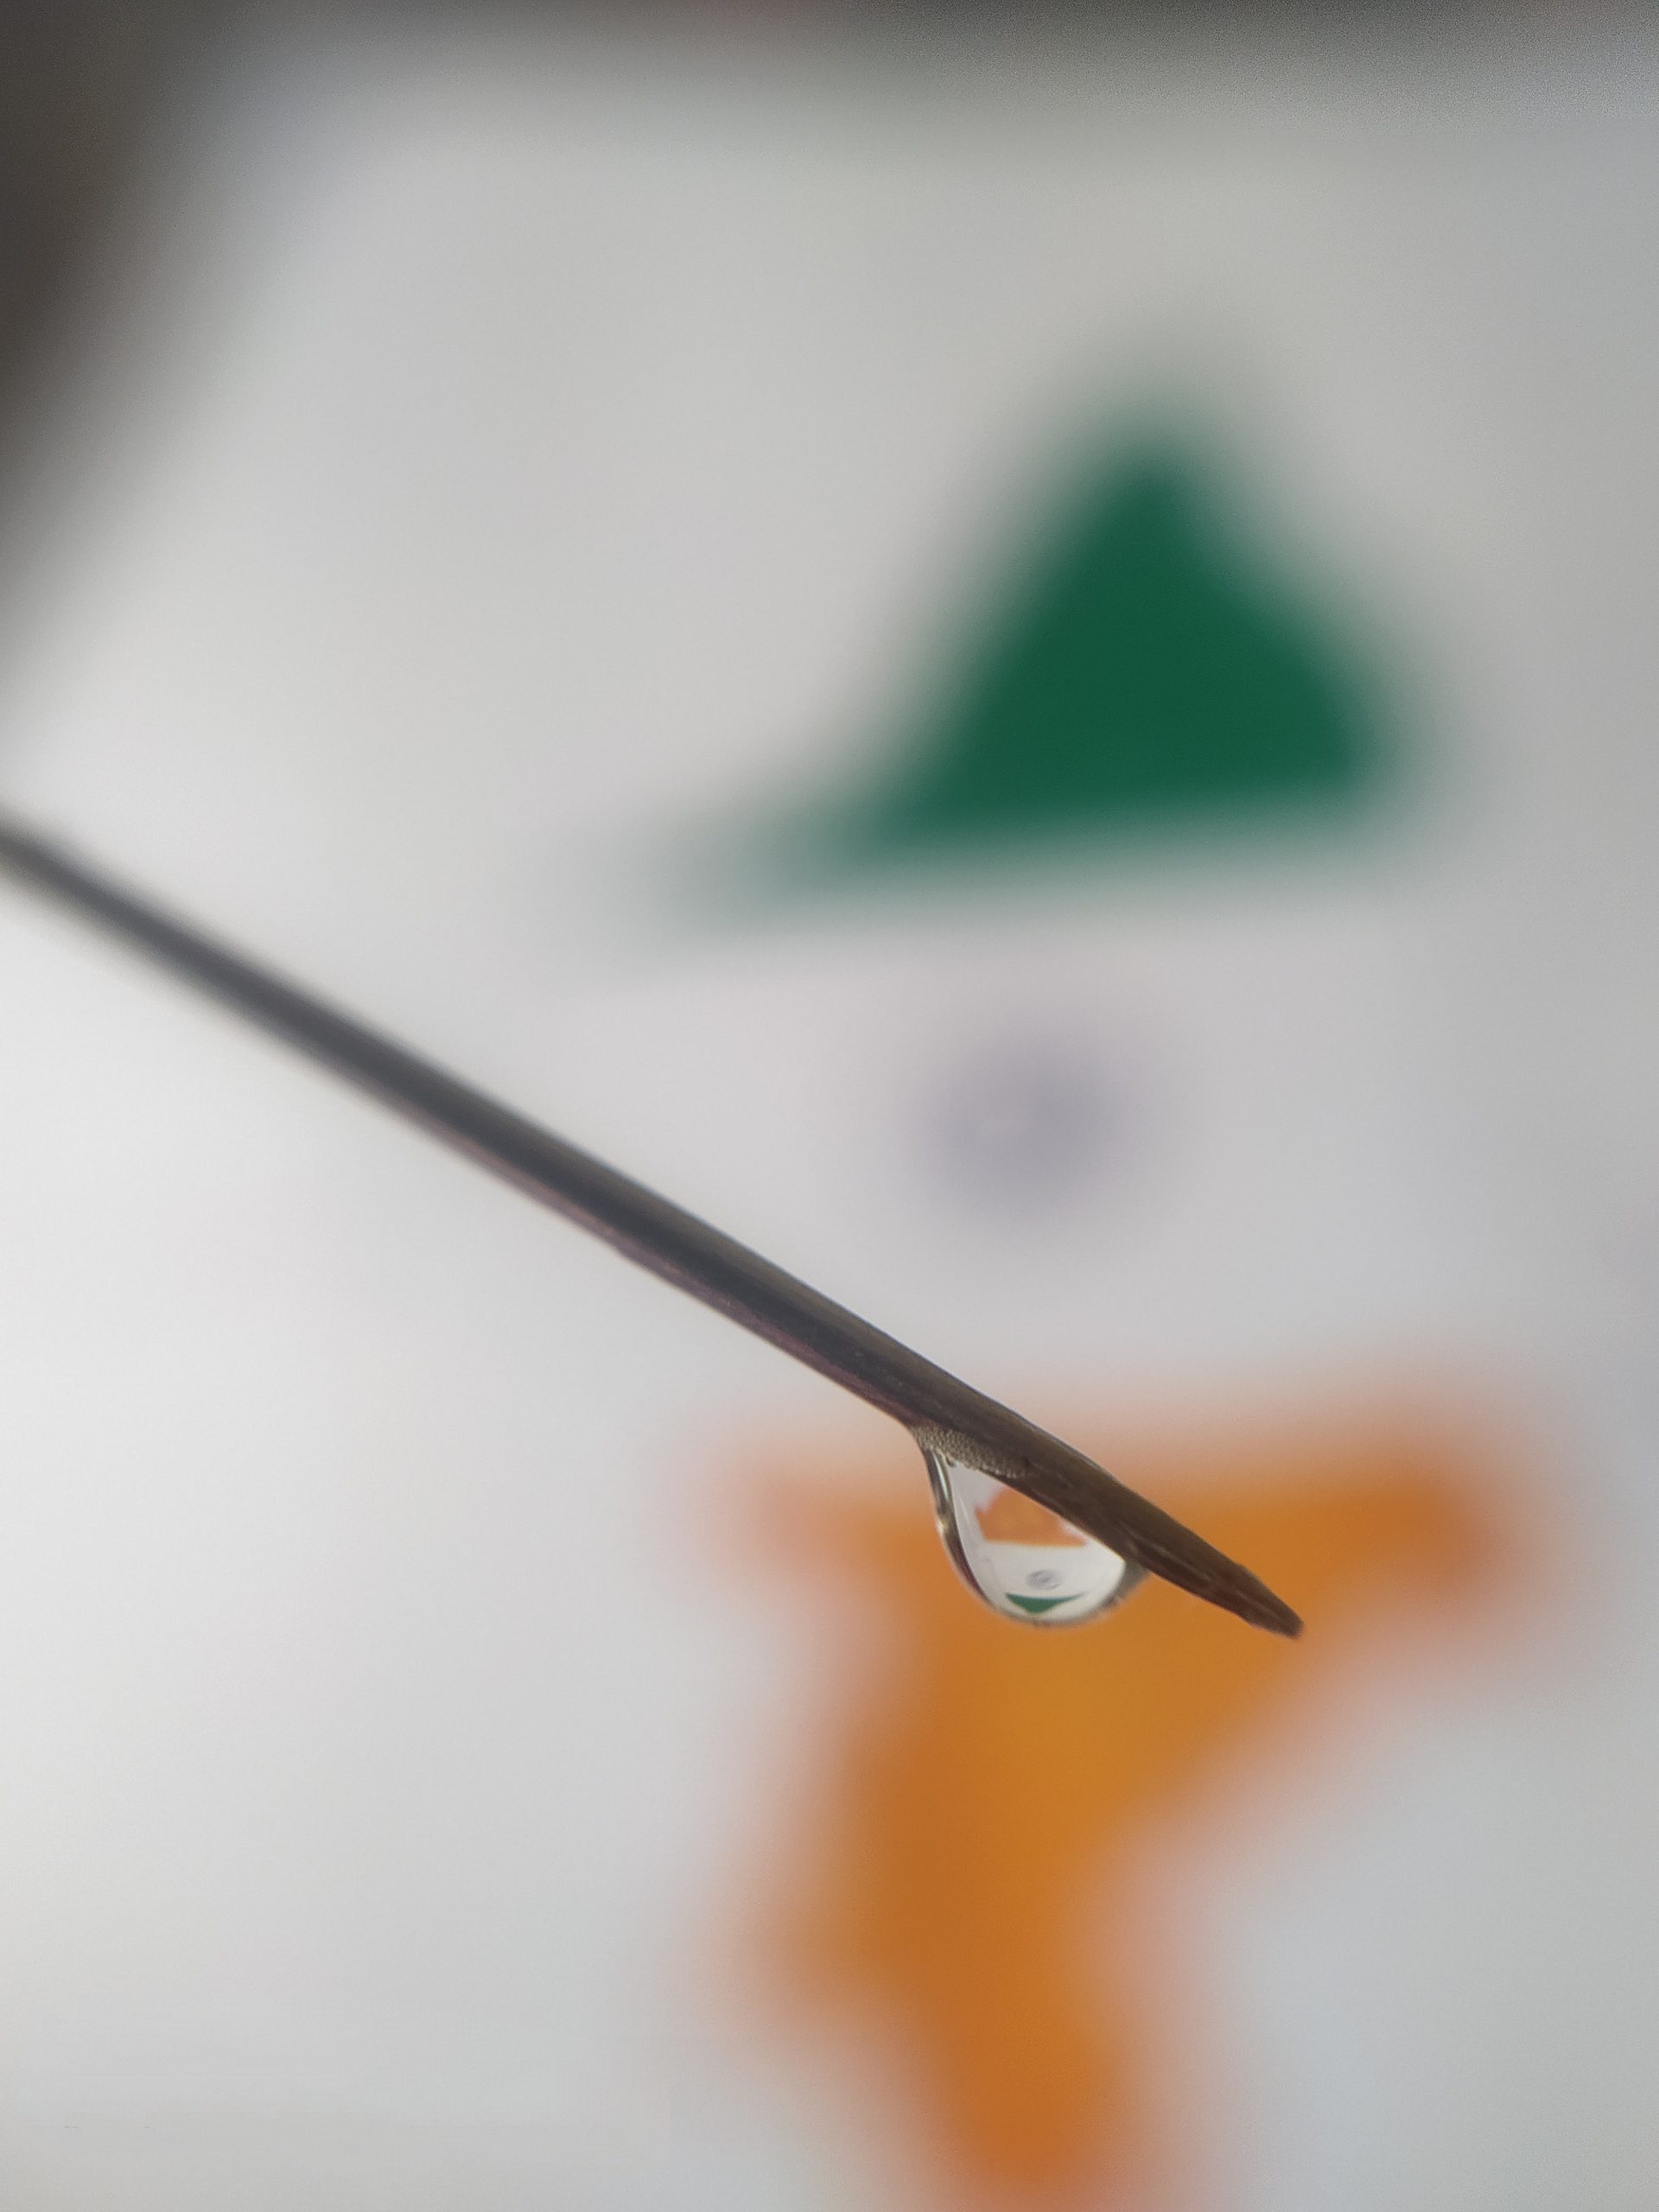 Water drop on a straw